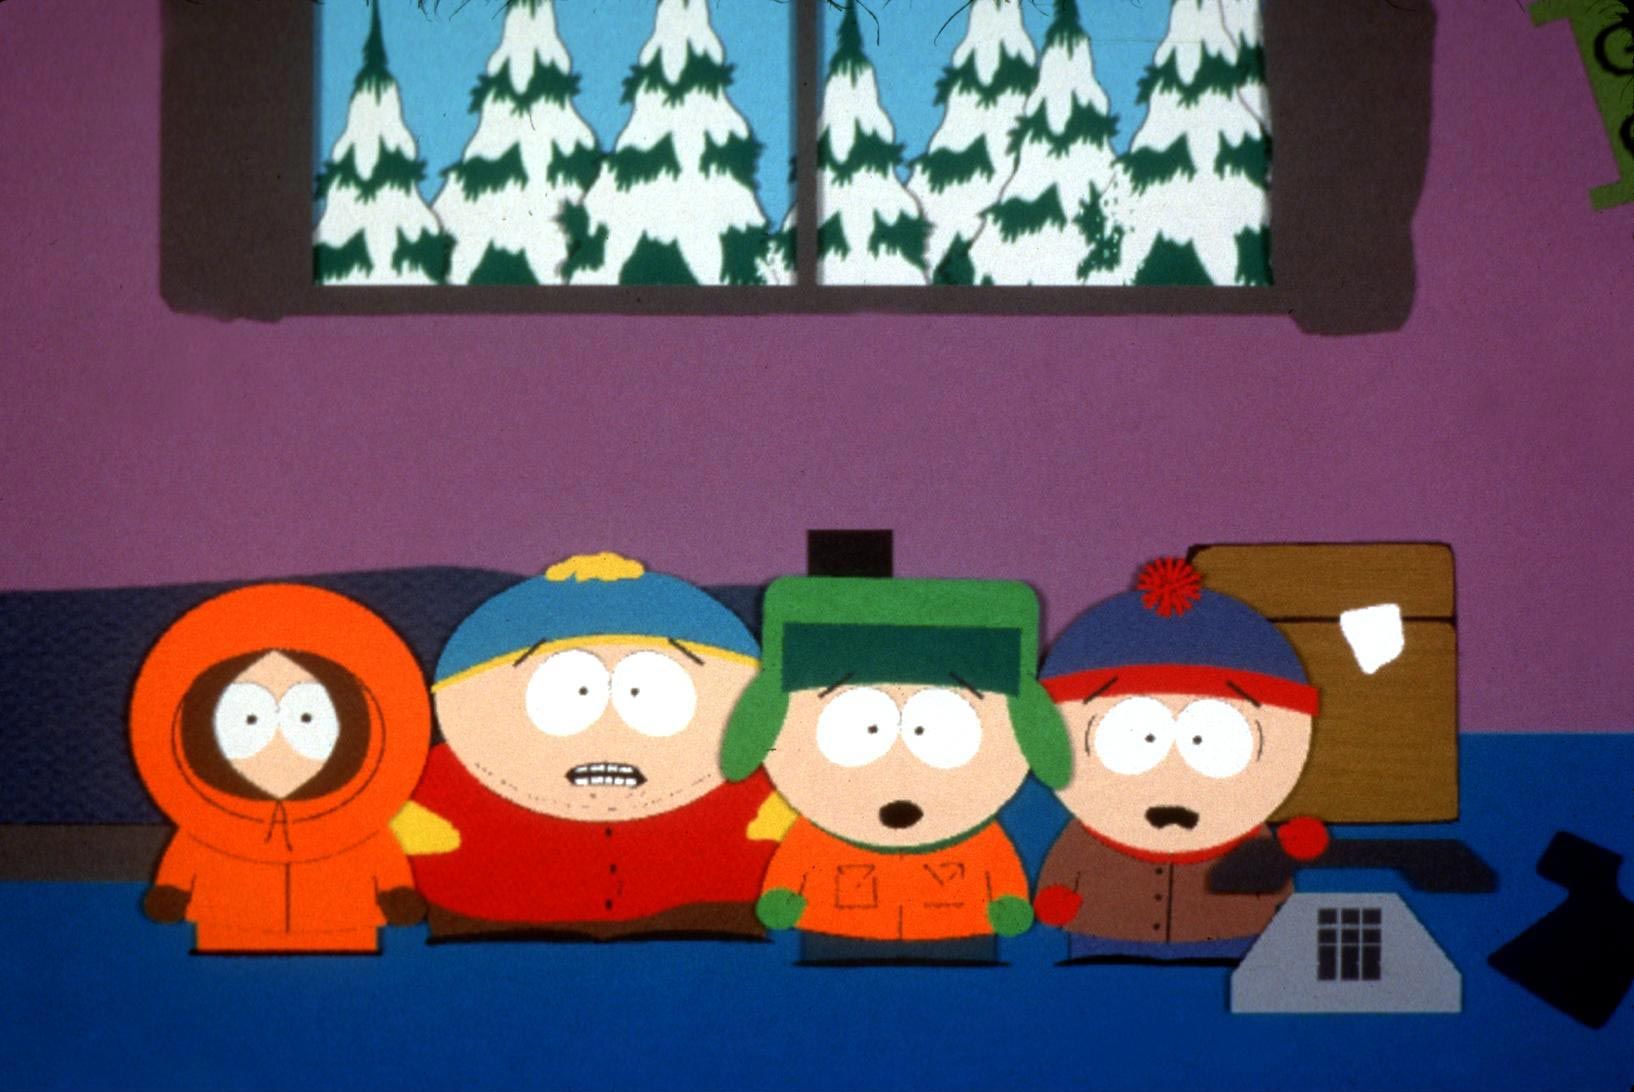 South Park Movie 'The Streaming Wars' to Premiere in June on